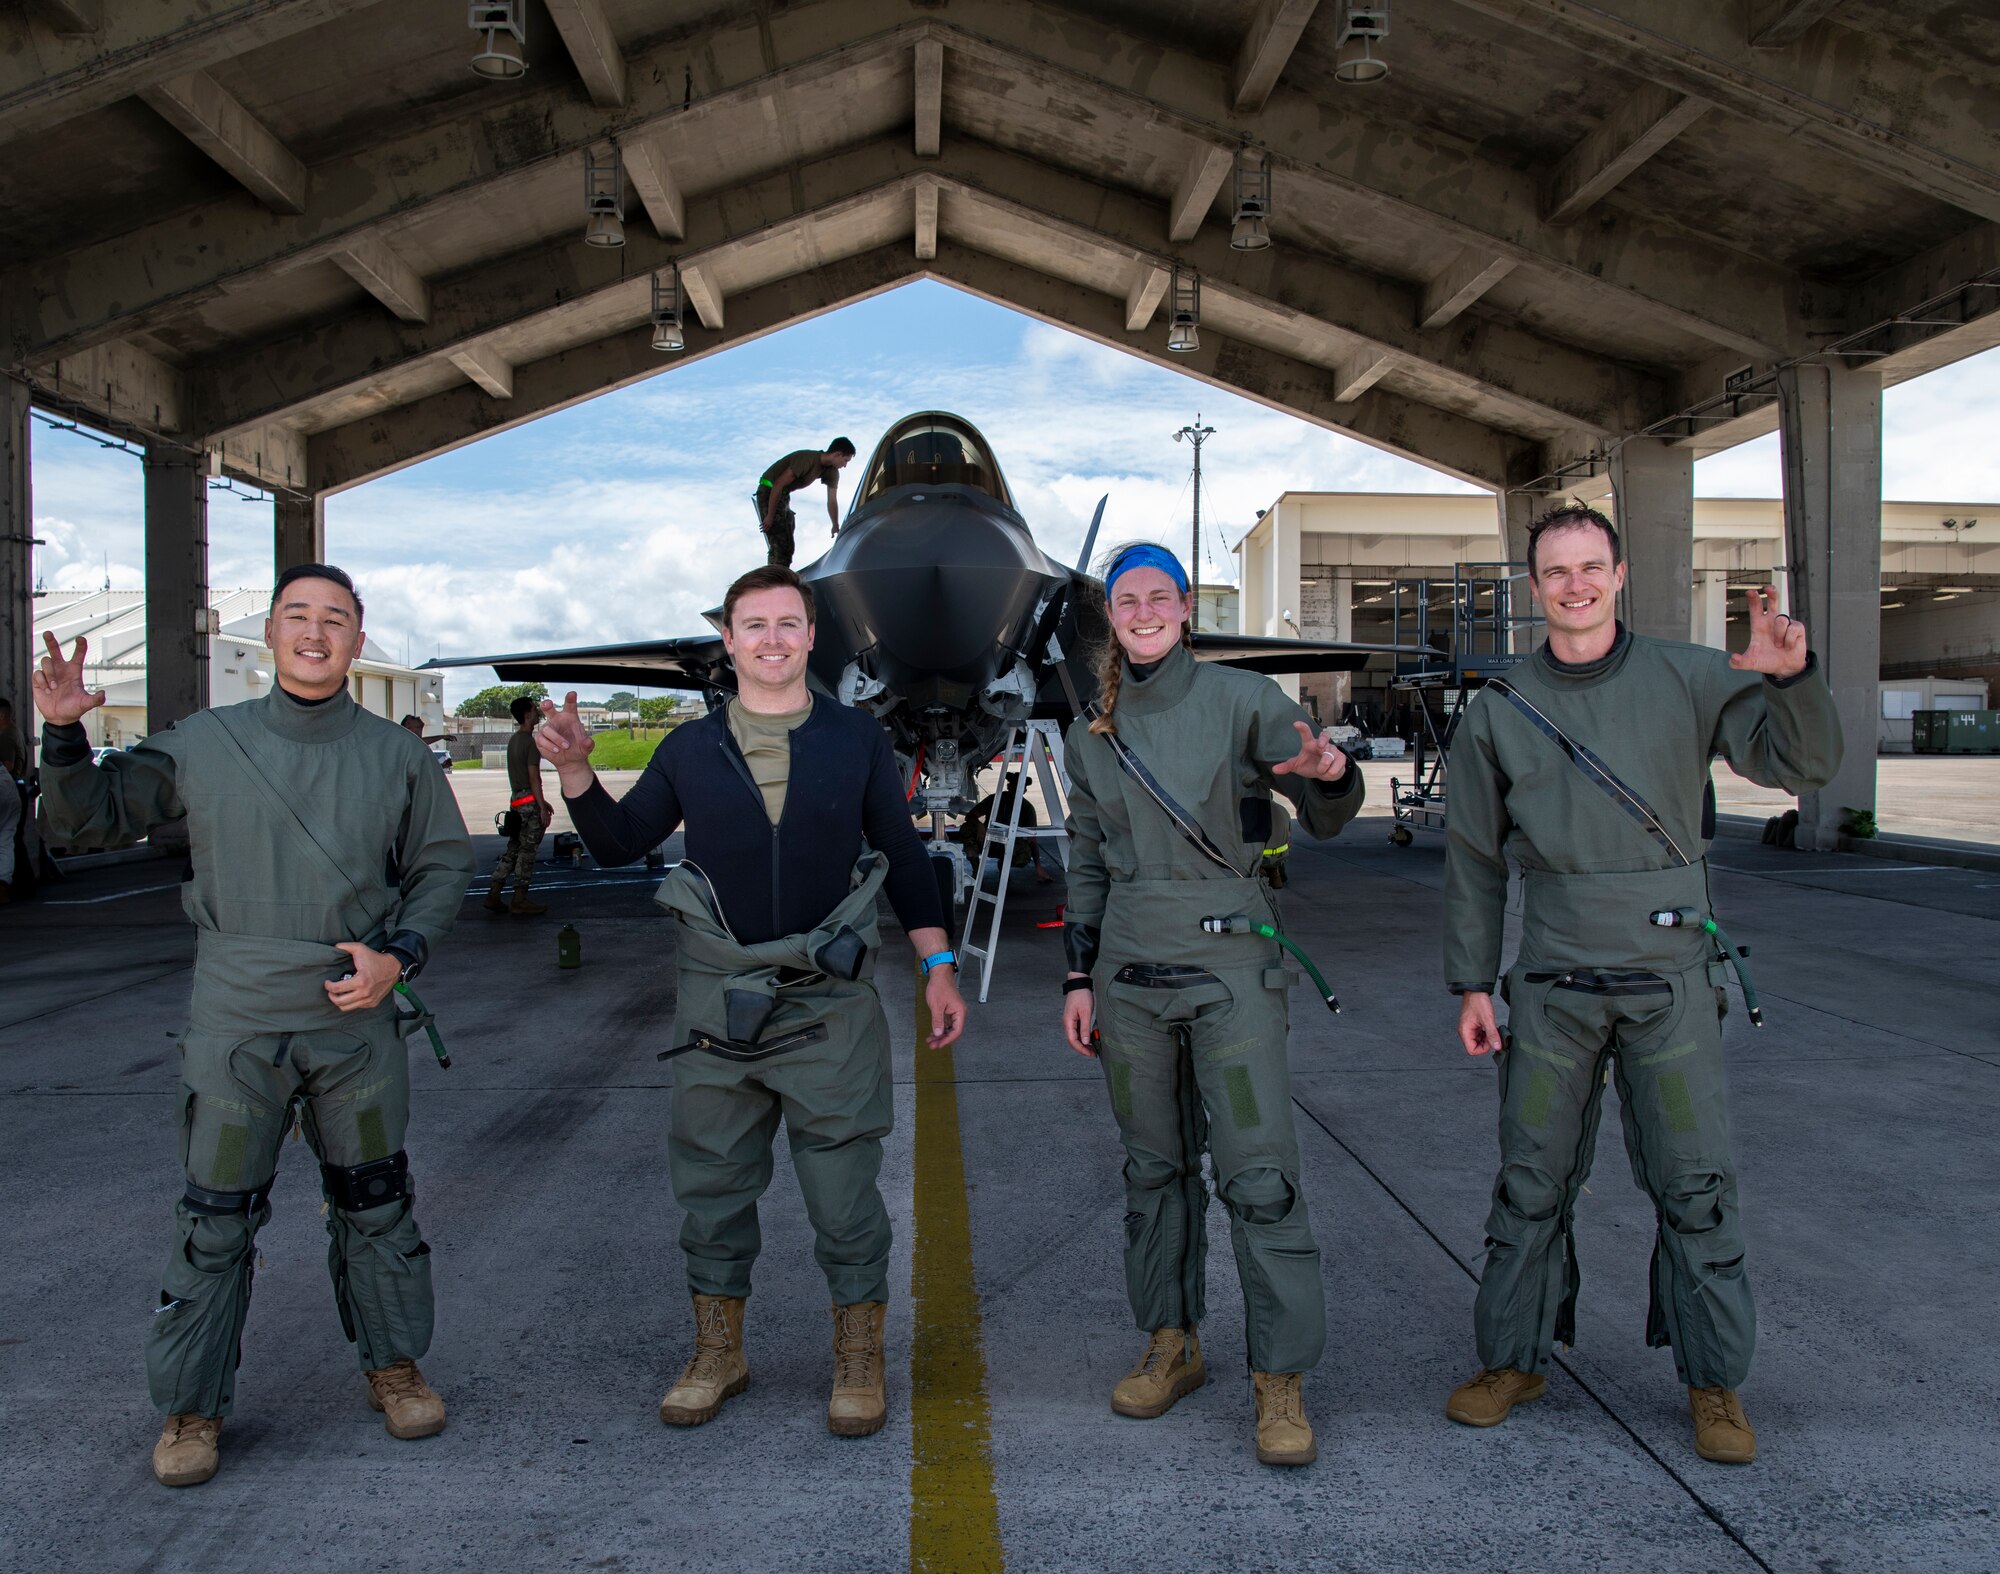 (Left to Right) U.S. Air Force Capt. Abraham Go, Capt. Joshua Christen, Capt. Rachel Self and Maj. John Tyholm, 355th Fighter Squadron, pilots, pose for a photo during Northern Edge 23-2 at Kadena Air Base, Japan, July 4, 2023